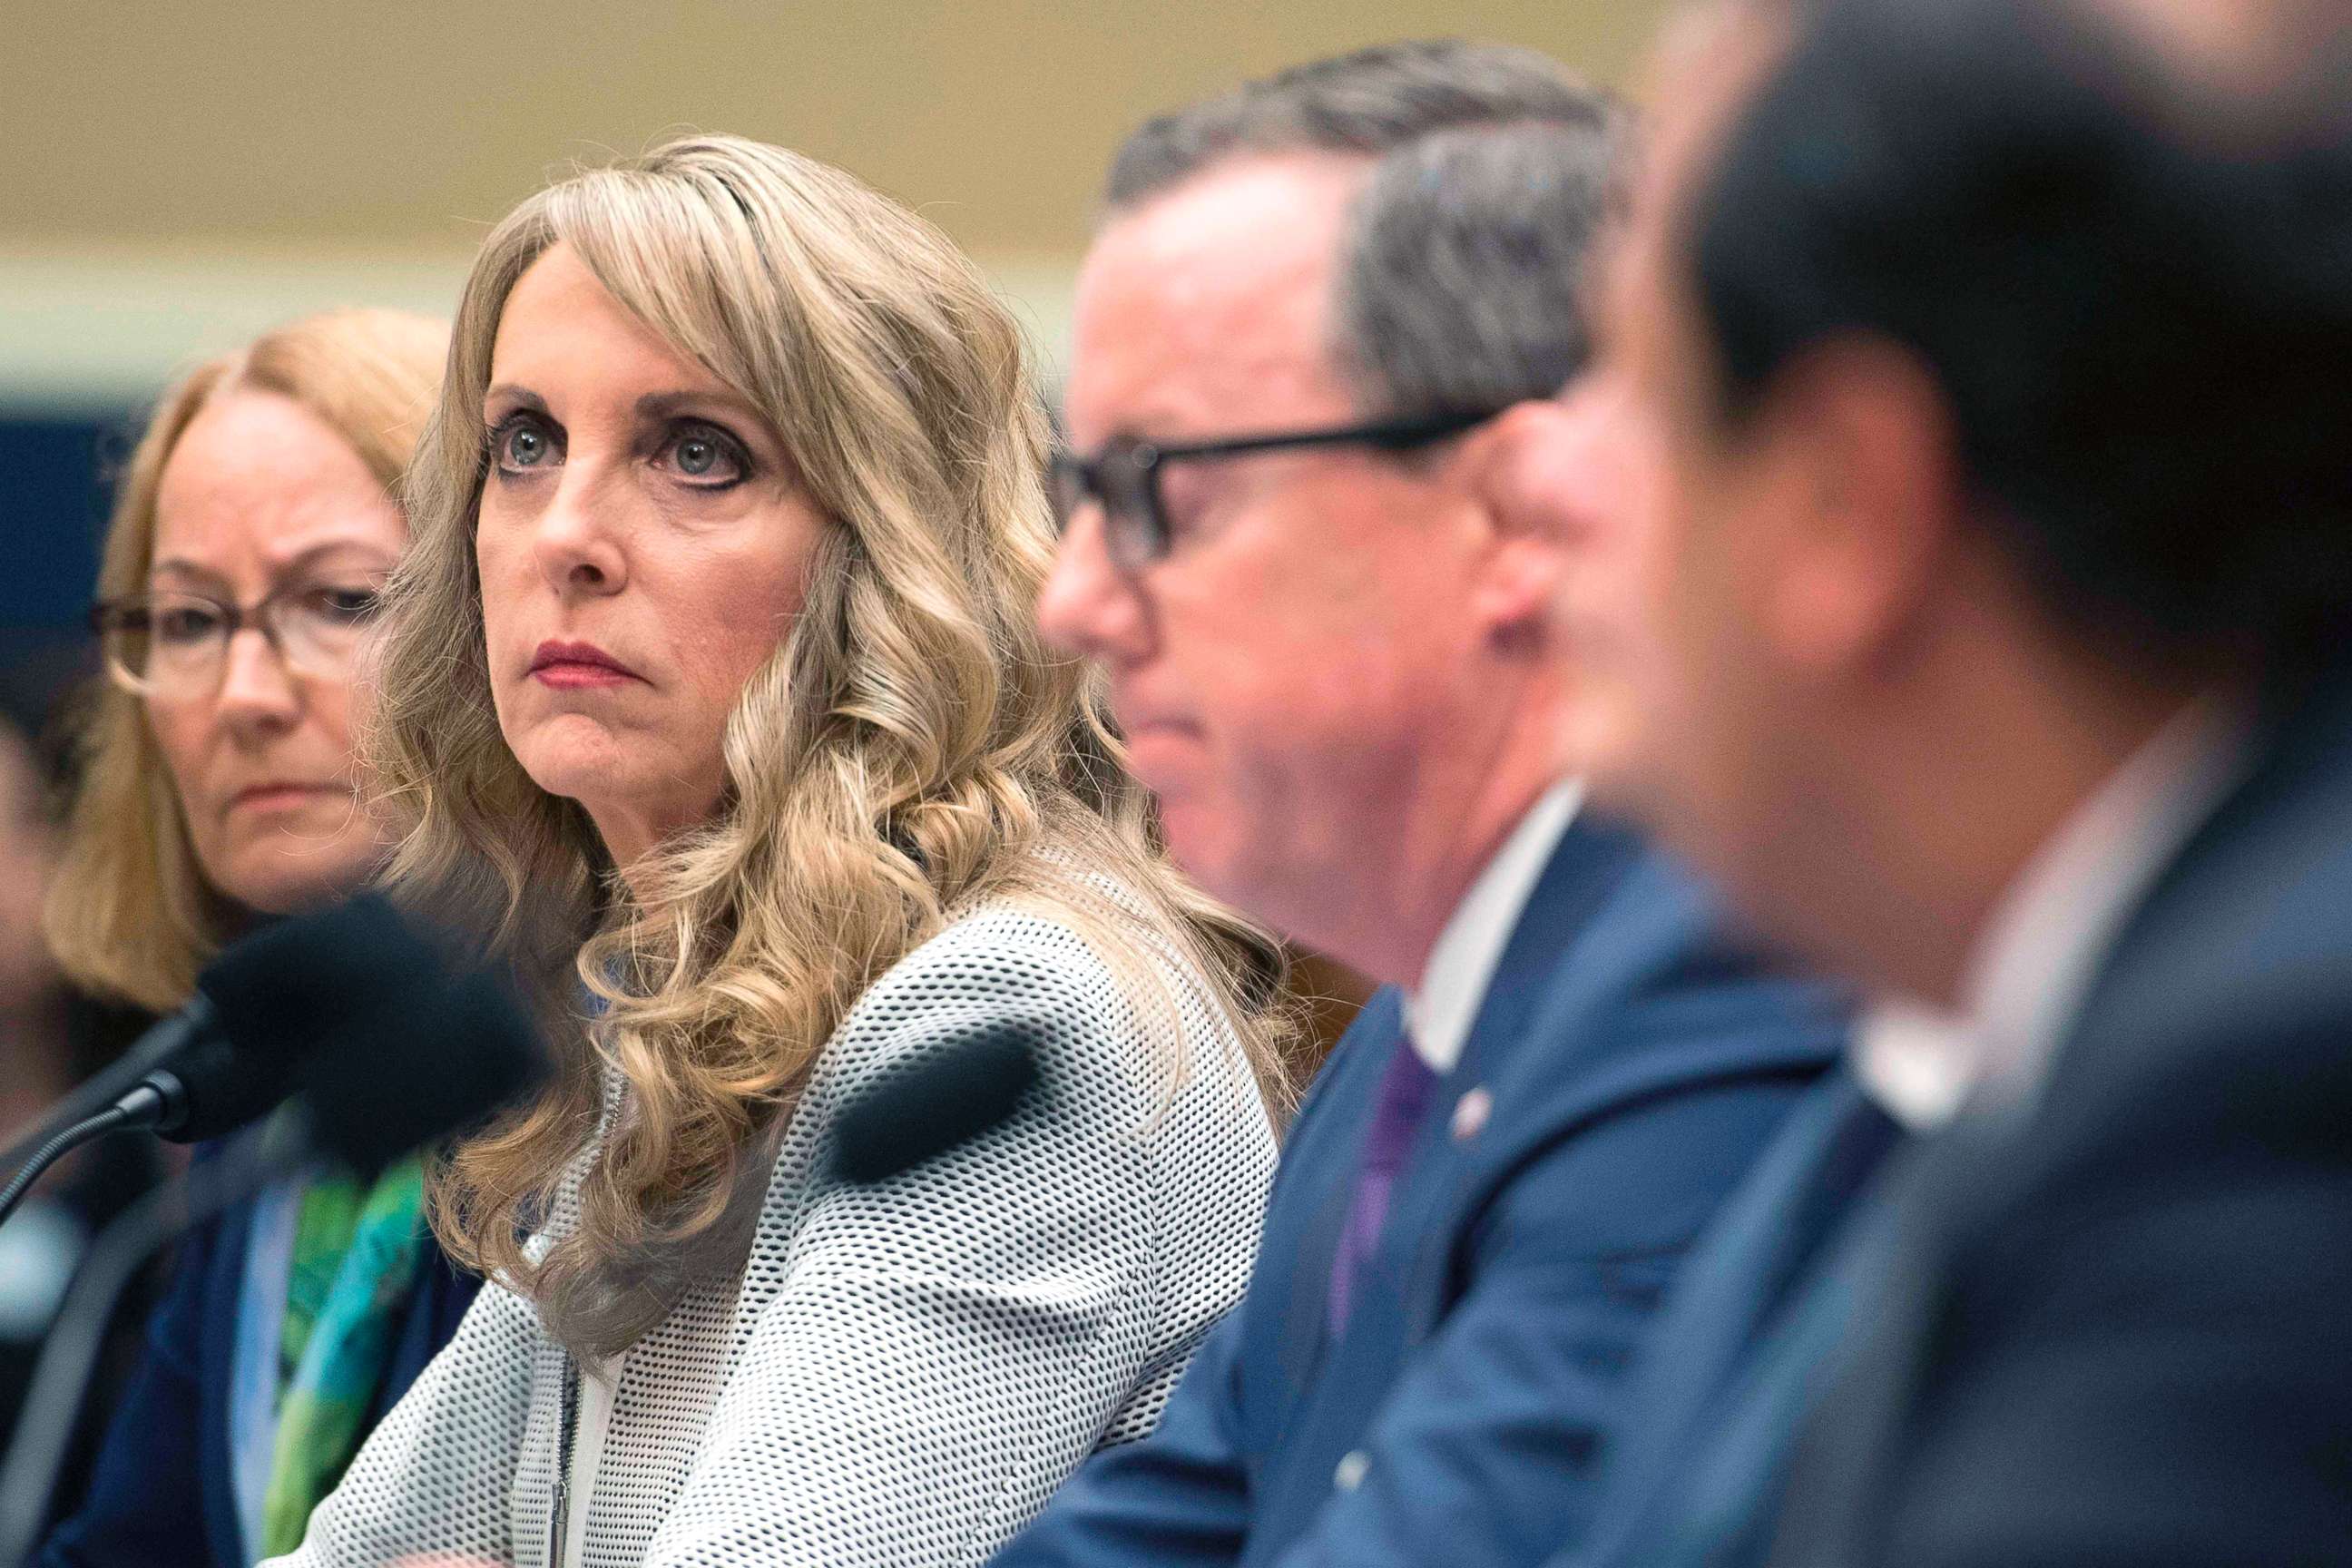 PHOTO: President and CEO of USA Gymnastics Kerry Perry testifies before the House Energy and Commerce Oversight and Investigations Subcommittee in Washington, D.C.,  May 23, 2018.